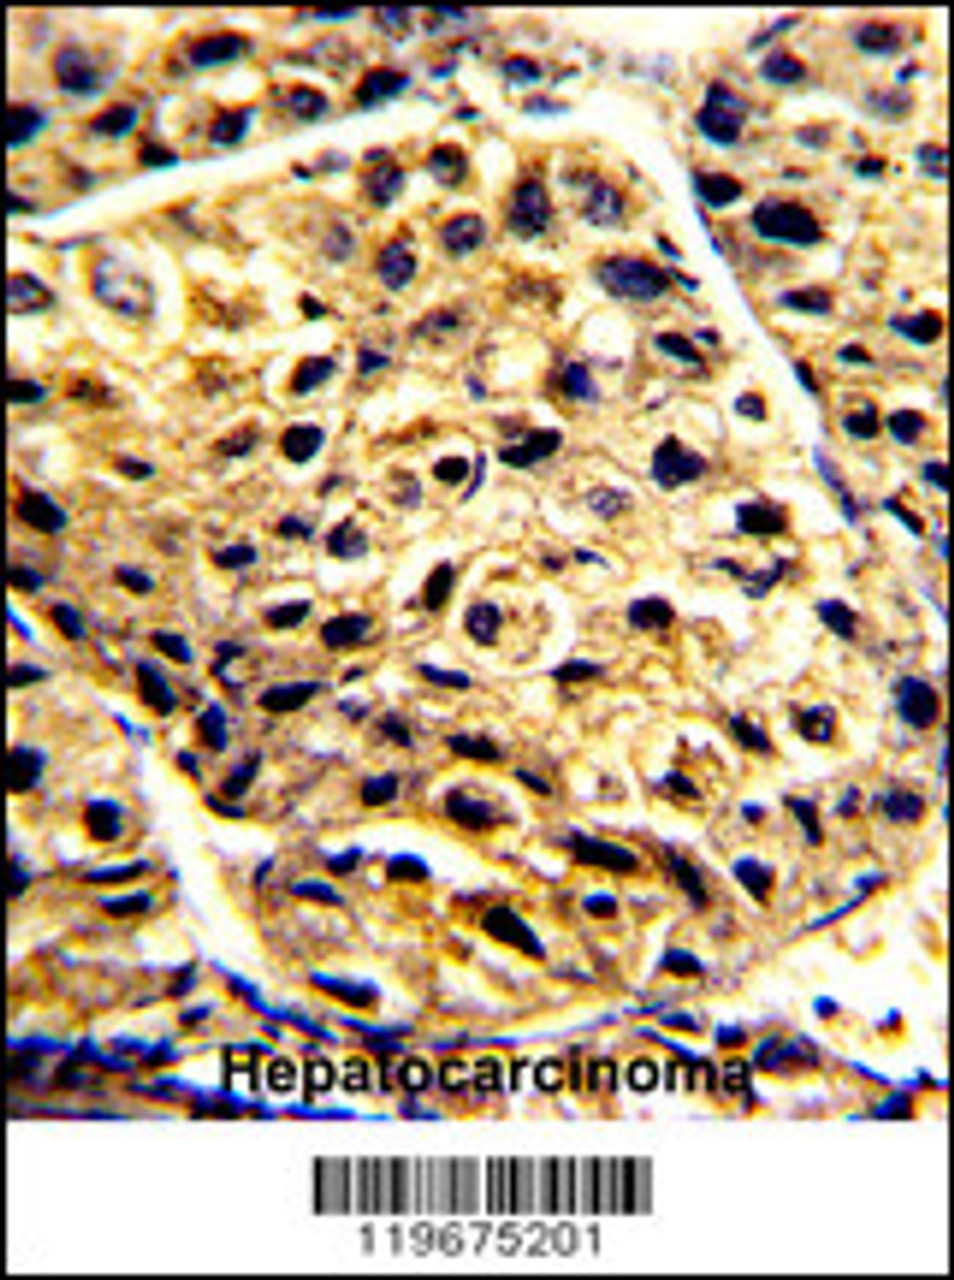 Formalin-fixed and paraffin-embedded human hepatocarcinoma with AADAC Antibody, which was peroxidase-conjugated to the secondary antibody, followed by DAB staining.